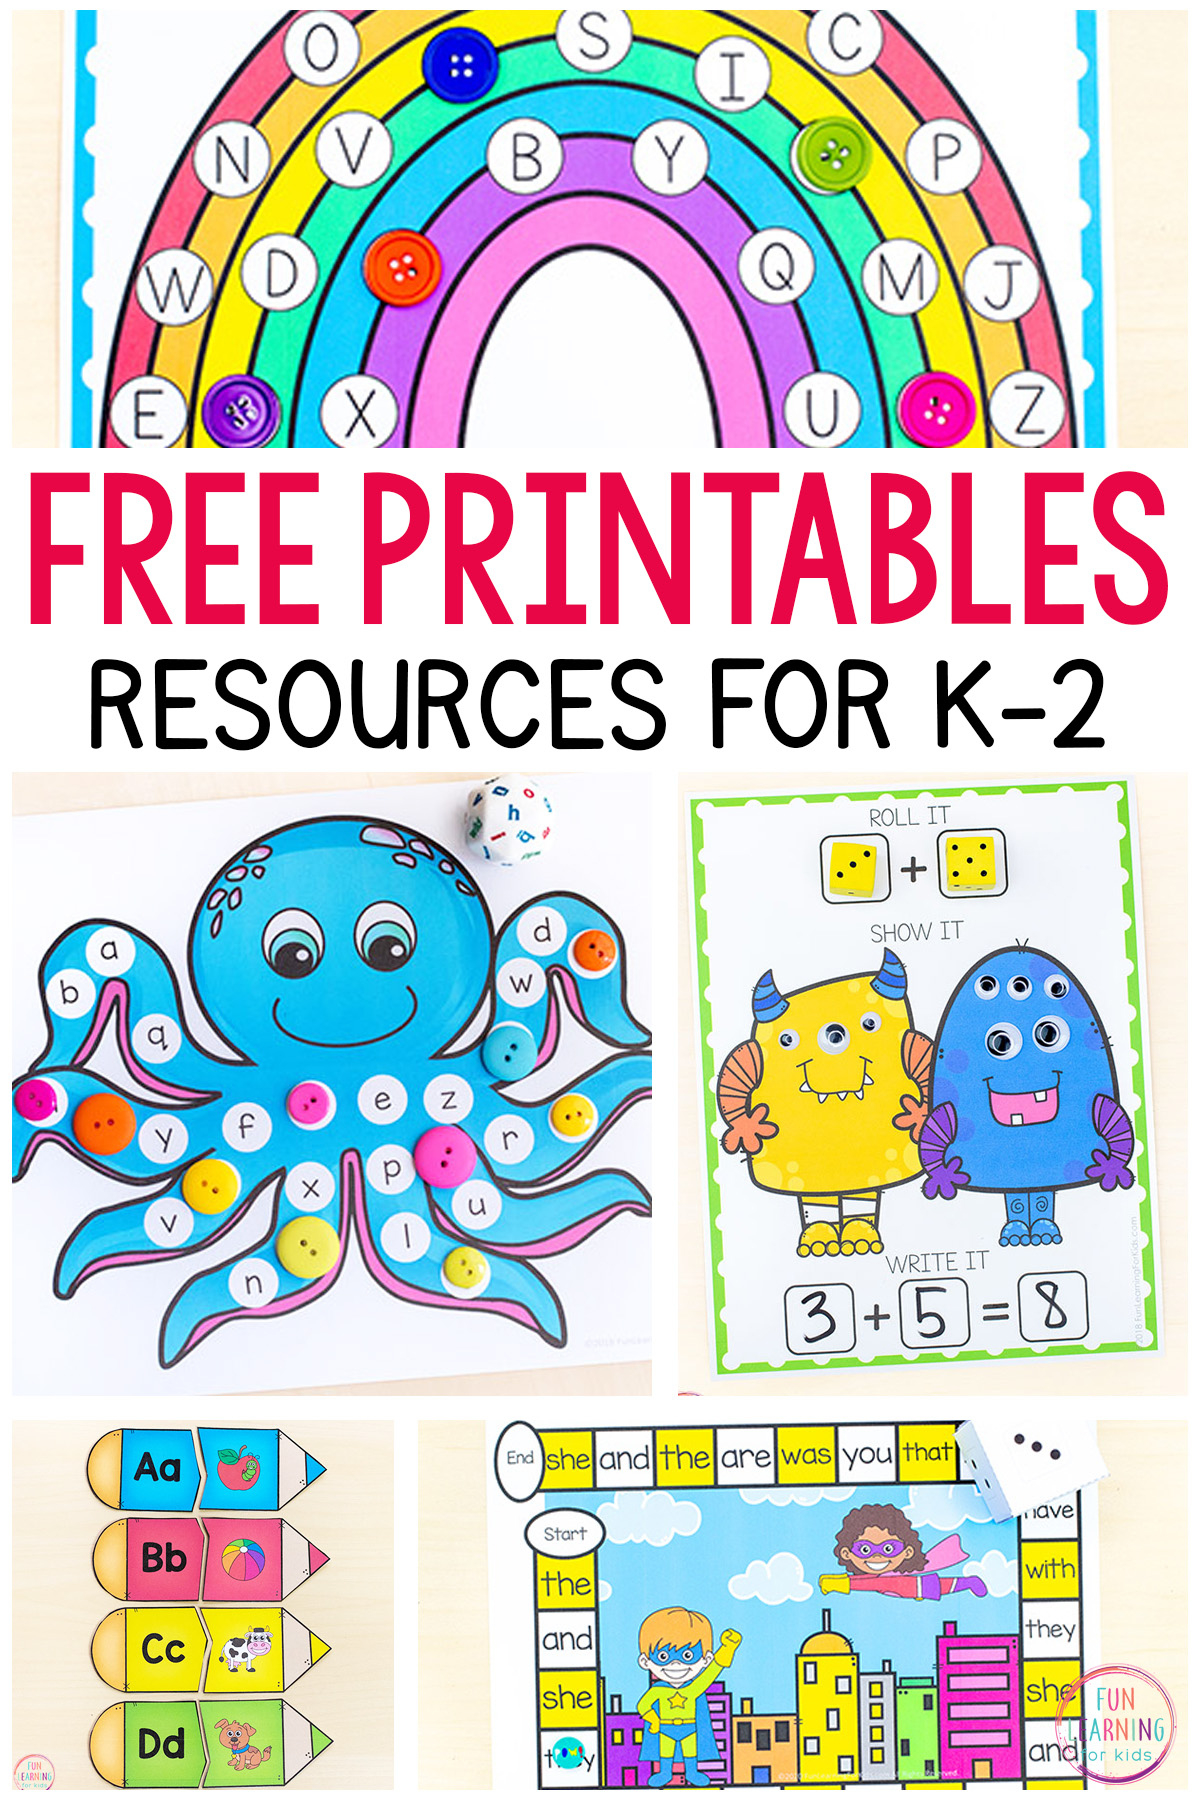 400+ Free Printables And Activities For Kids with regard to Free Printable Activities For Kids